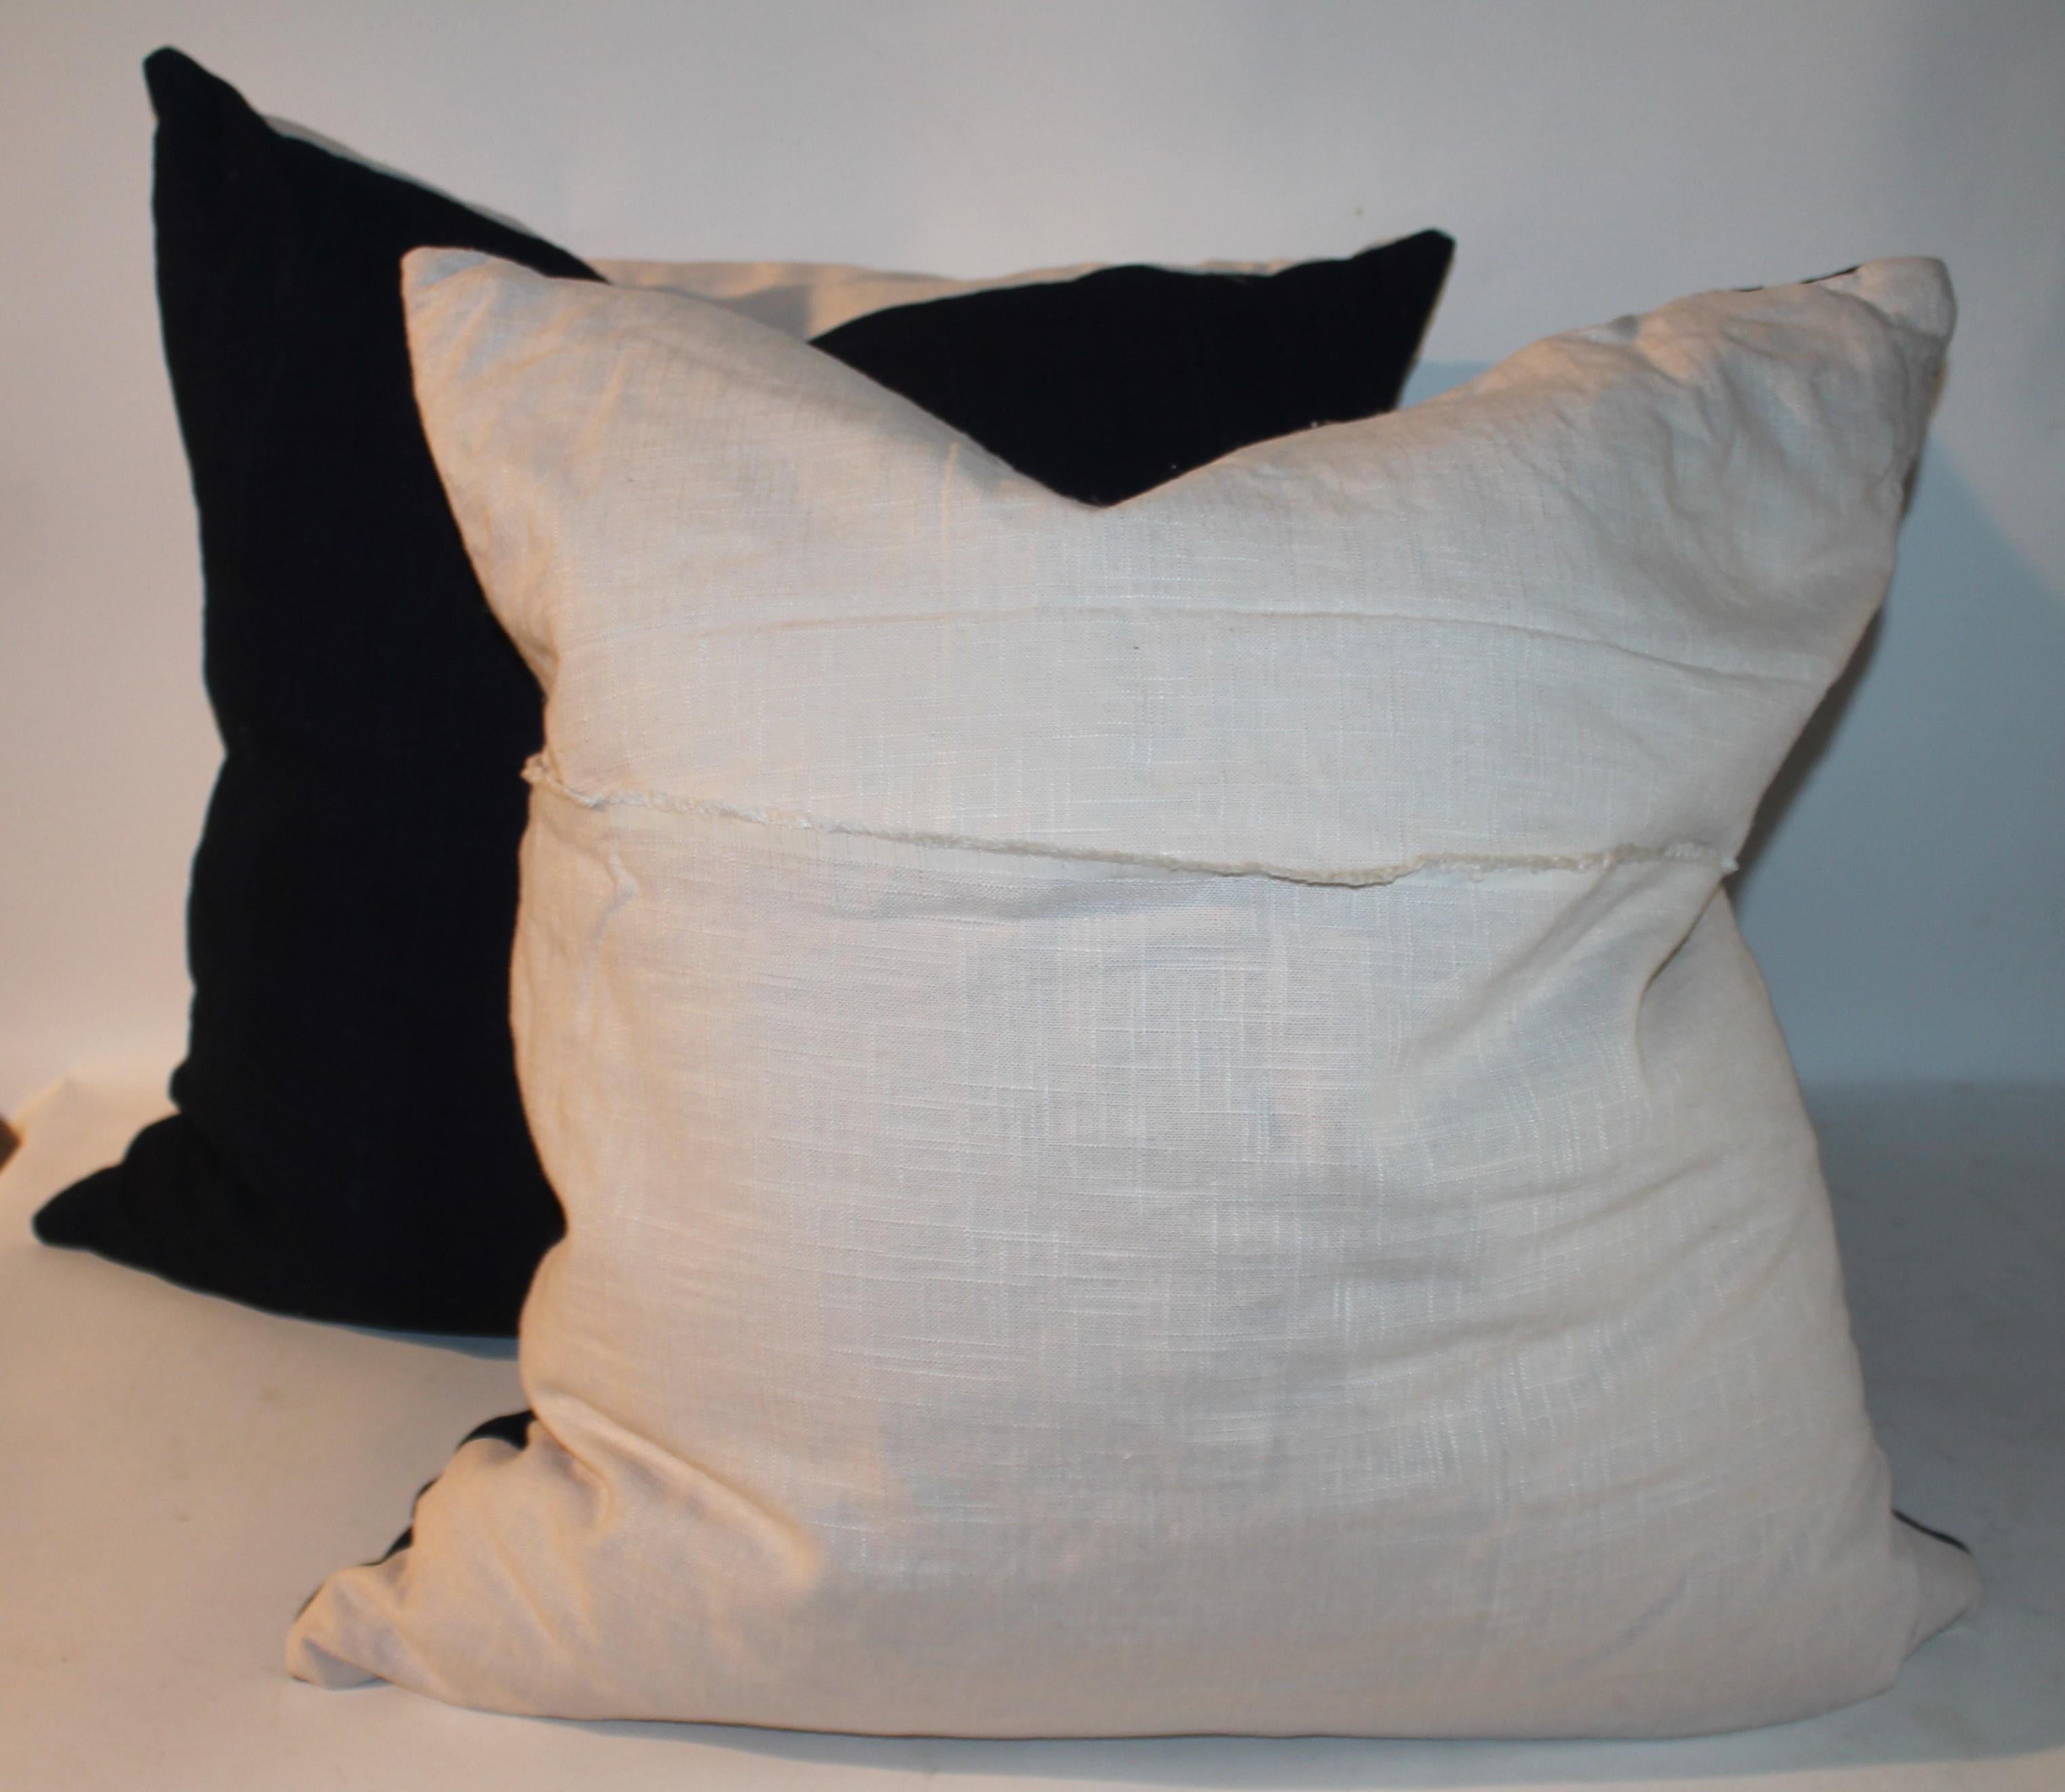 These amazing deep indigo linen pillows are amazing and a very nice soft hand woven linen. The backings are white homespun linen backings. The inserts are down & feather fill.Sold as a pair.